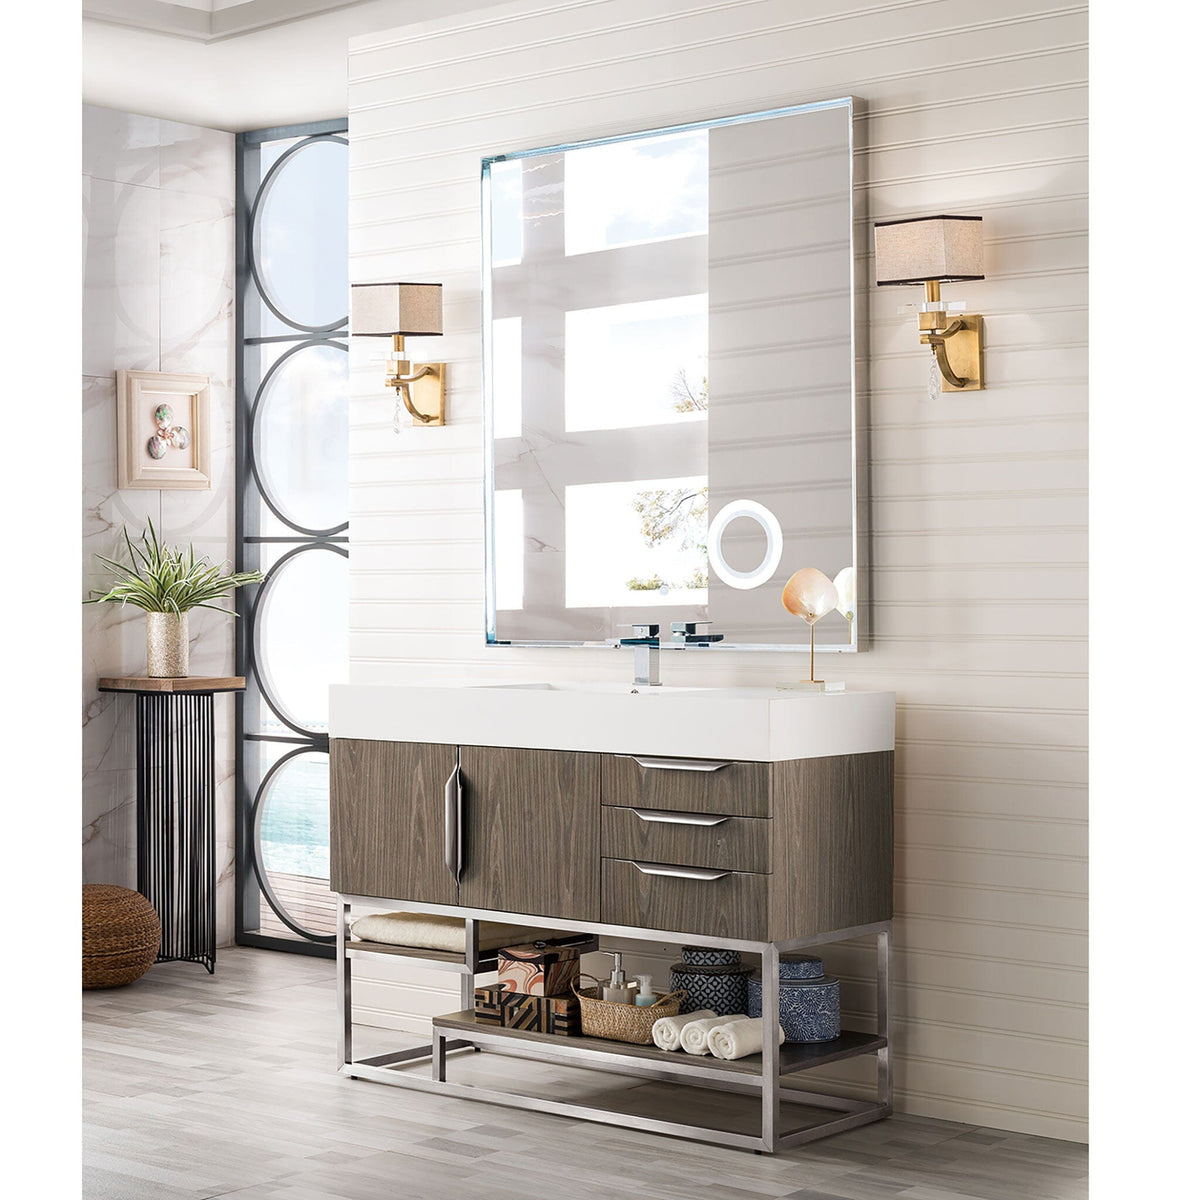 48" Columbia Single Bathroom Vanity, Ash Gray w/ Brushed Nickel Base and Glossy White Composite Stone Top